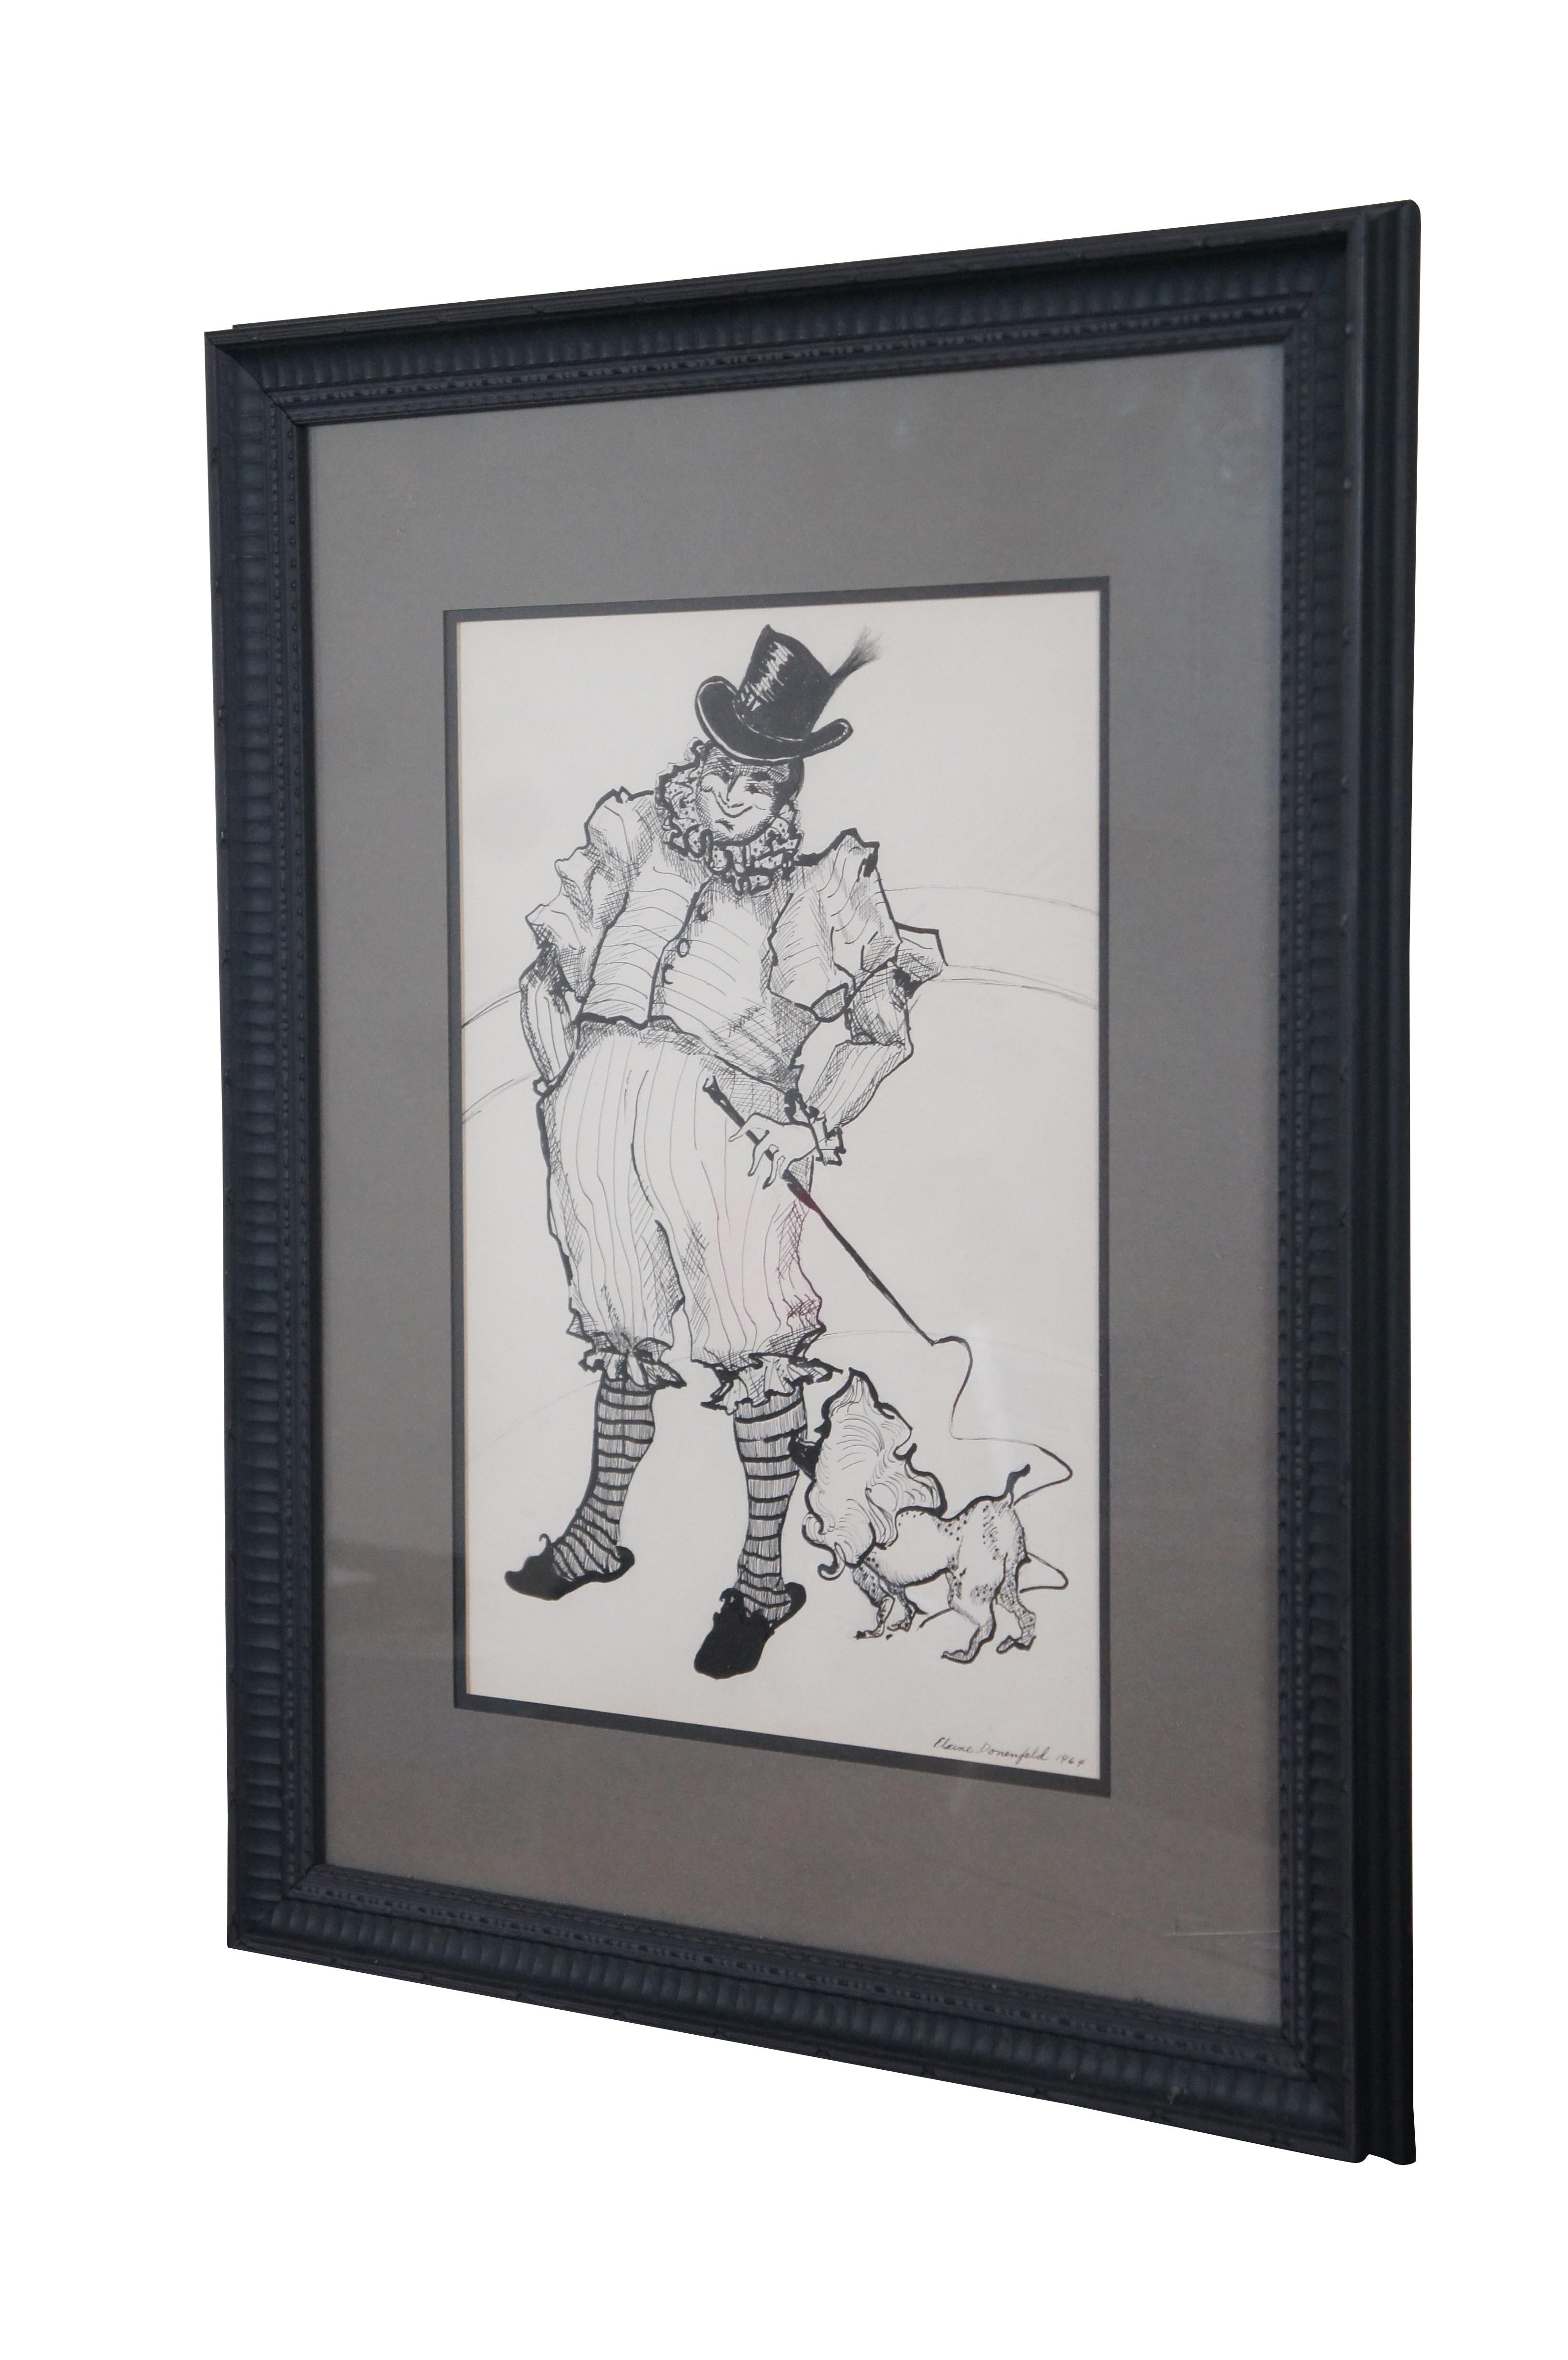 A creative portrait drawing by Elaine Donenfeld from 1964. The ink drawing is on paper and features a circus lion tamer in B + W with pet. Signed lower right. Framed in green and matted. Elaine Levine Denenfeld (1928 - 2007). Born in Dayton, Ohio